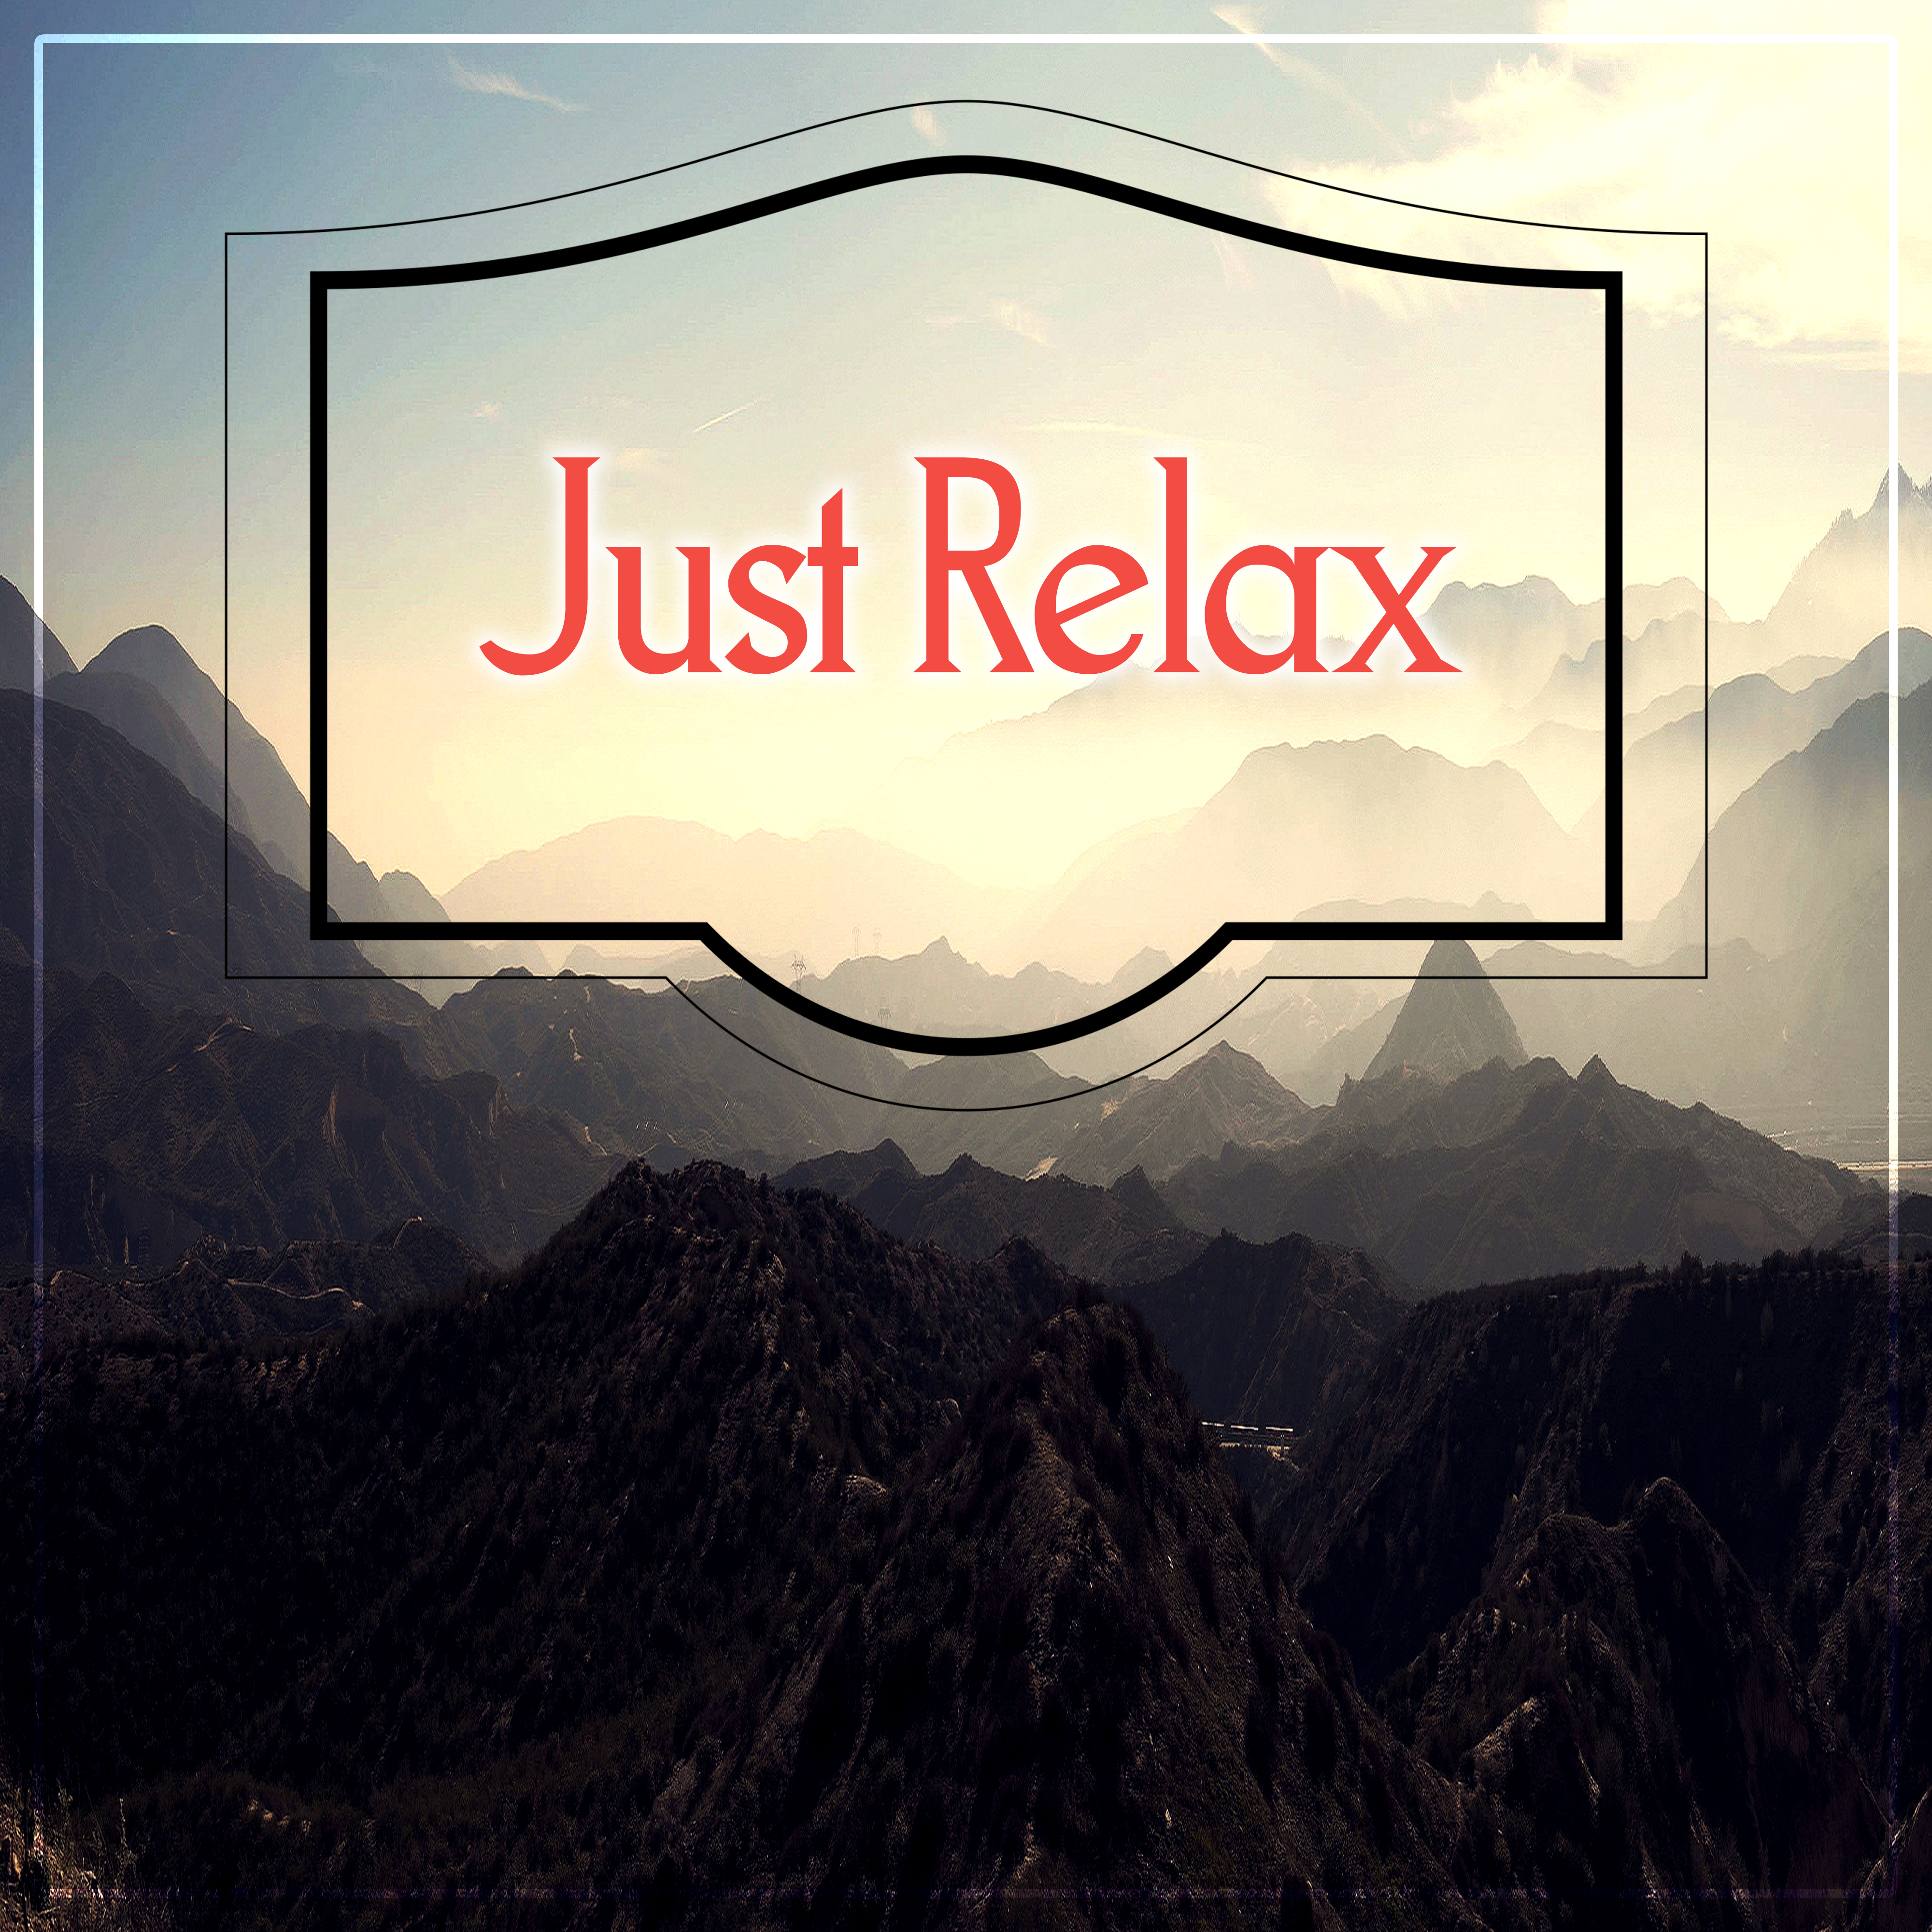 Just Relax – Calm Sounds of Nature, Be Close the Nature at Your Office, Pure Mind & Take Positive Energy to the Rest Day, Feel Deep Relaxation, Background Music for Relax, New Age Music